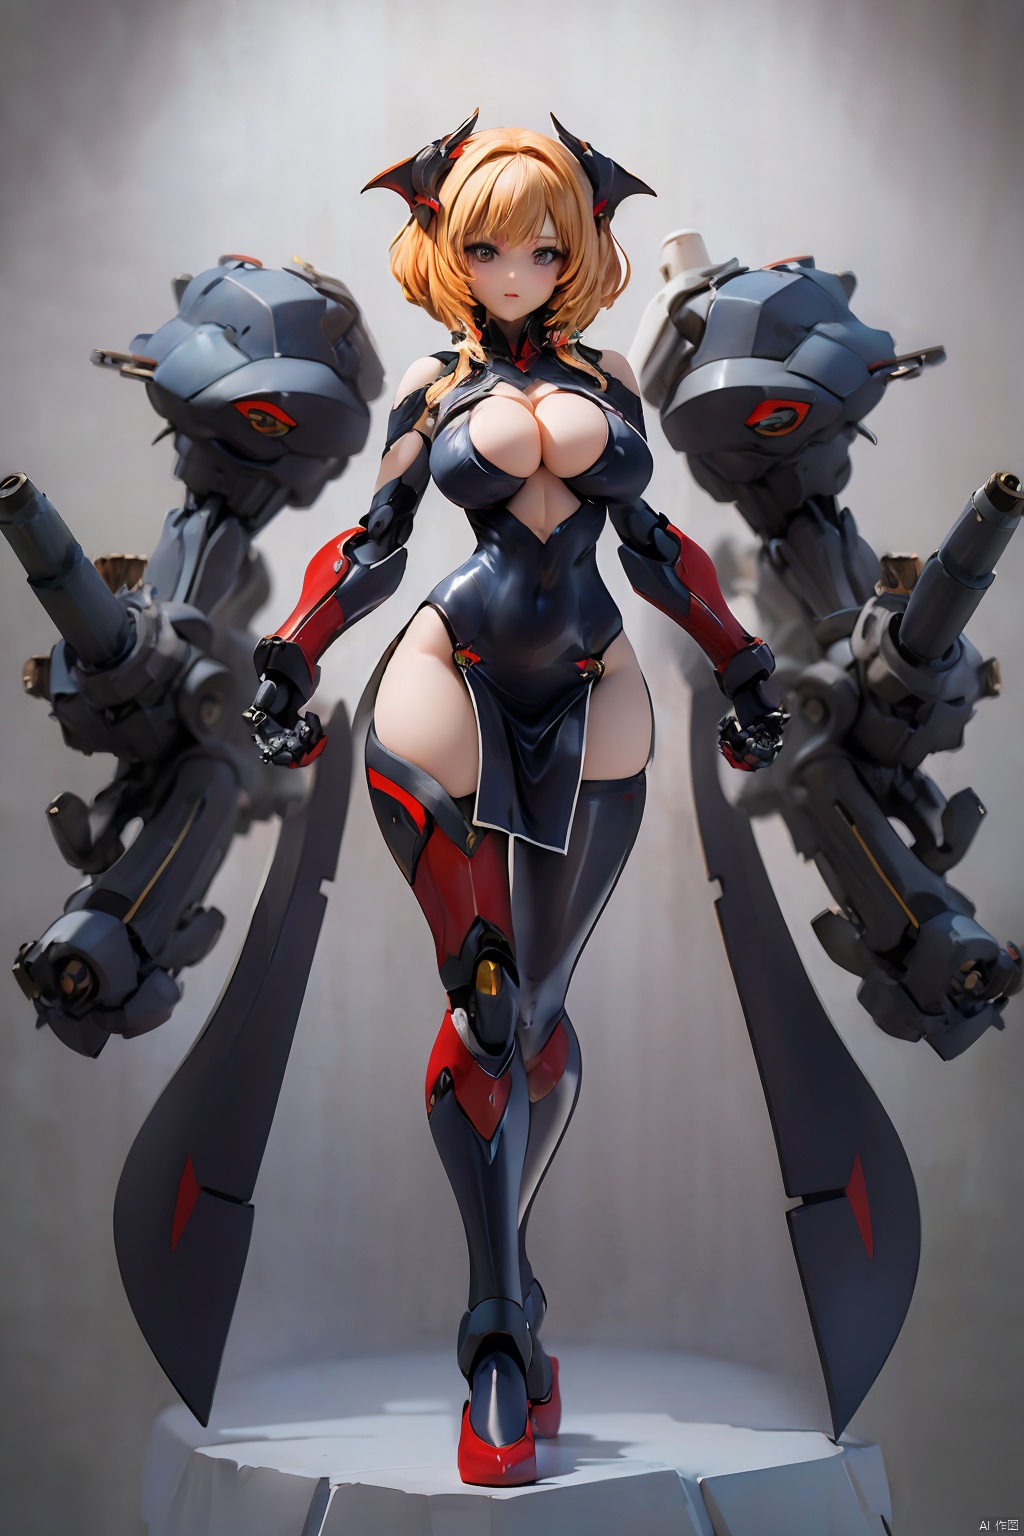 Full-body-shot,(naked:1),(gigantic breasts 1:0.6),cleavage,(Masterpiece: 1.6, (highly detailed: 1.6), (best quality: 1.6) (high resolution: 1.6) 1 nude girl, red patent leather Skin-tight garment, (mechanical: 1.1), complex decoration, armed weapons, Futurism, huge breasts, punk,machinery,blue_jijiaS,Sexy muscular,ROBORT,Hourglass body shape,ABS, Mecha dress, Lactating, Wear loin cloth, ROBORT, mecah dragon, tutult